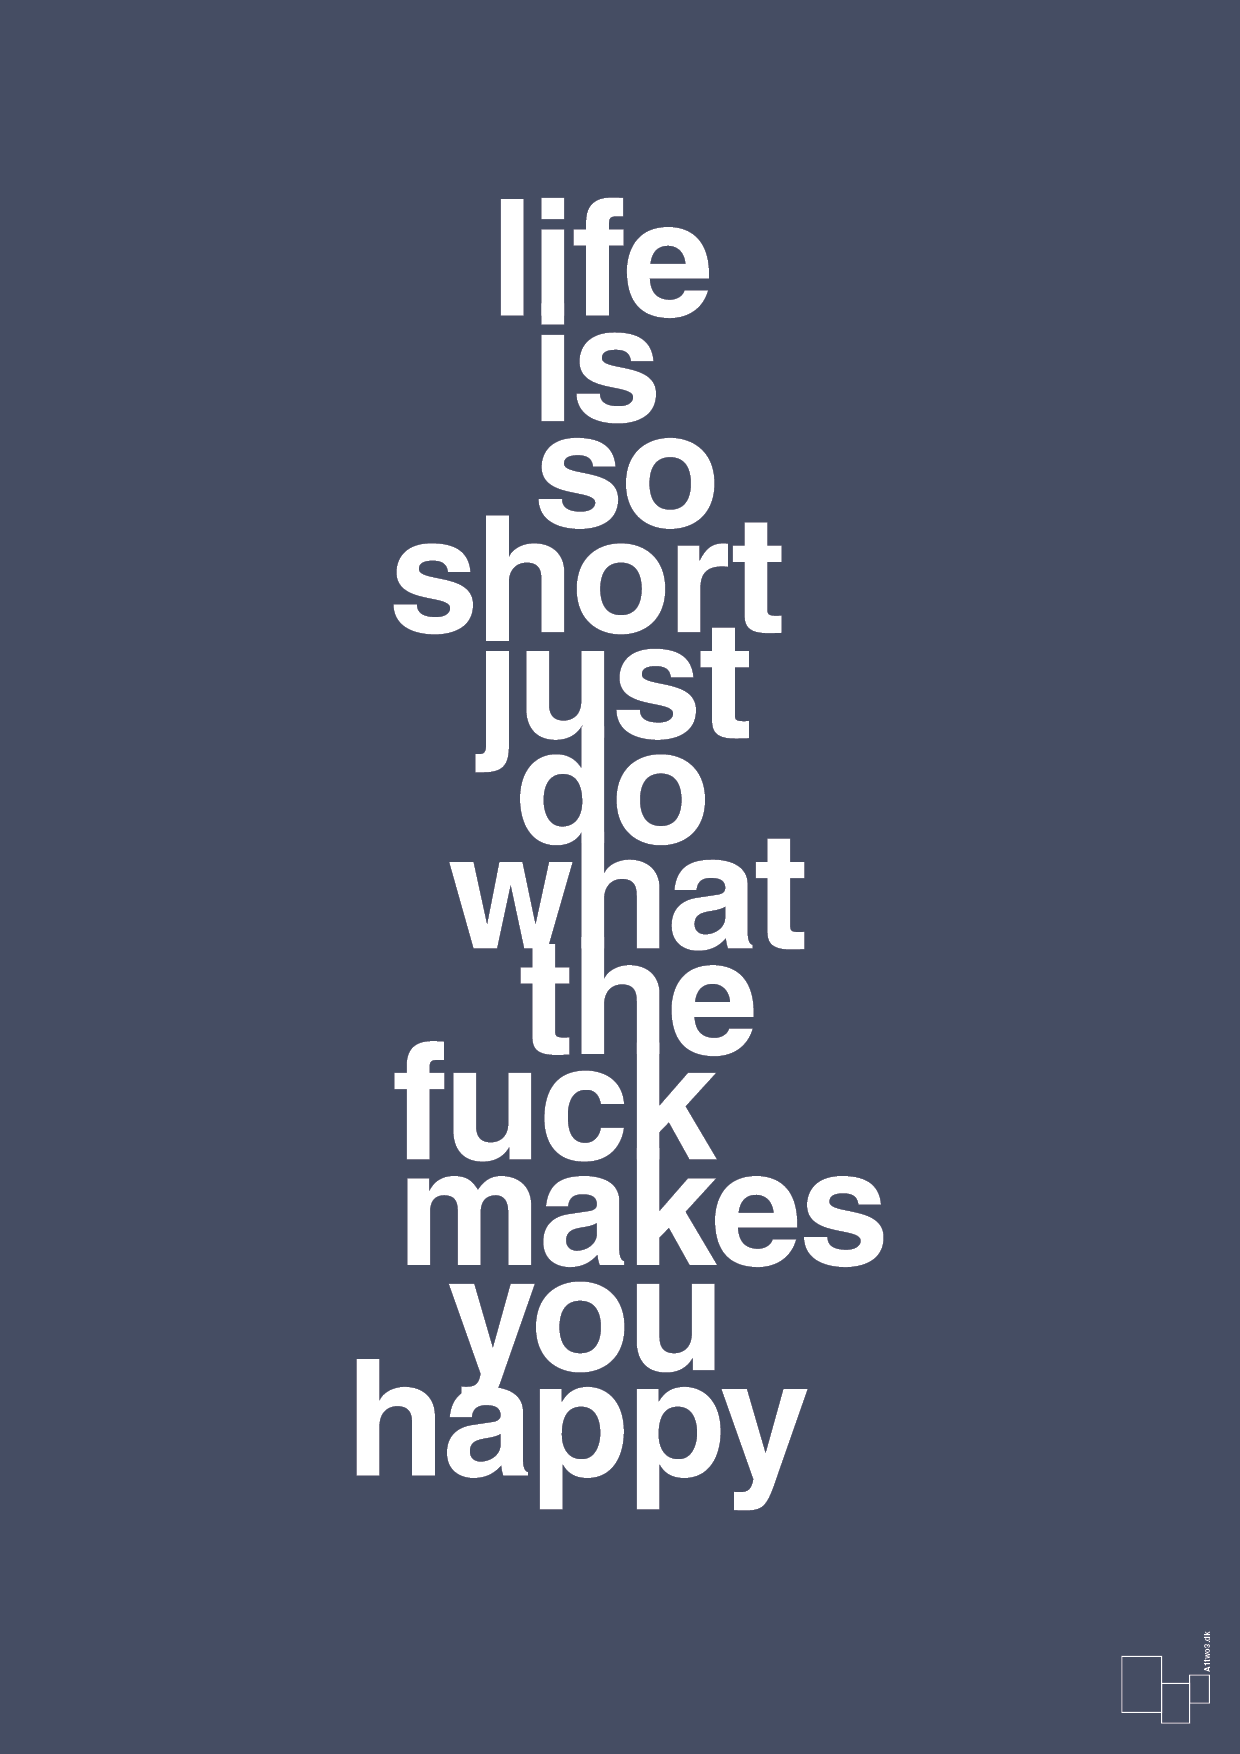 life is so short just do what the fuck makes you happy - Plakat med Ordsprog i Petrol